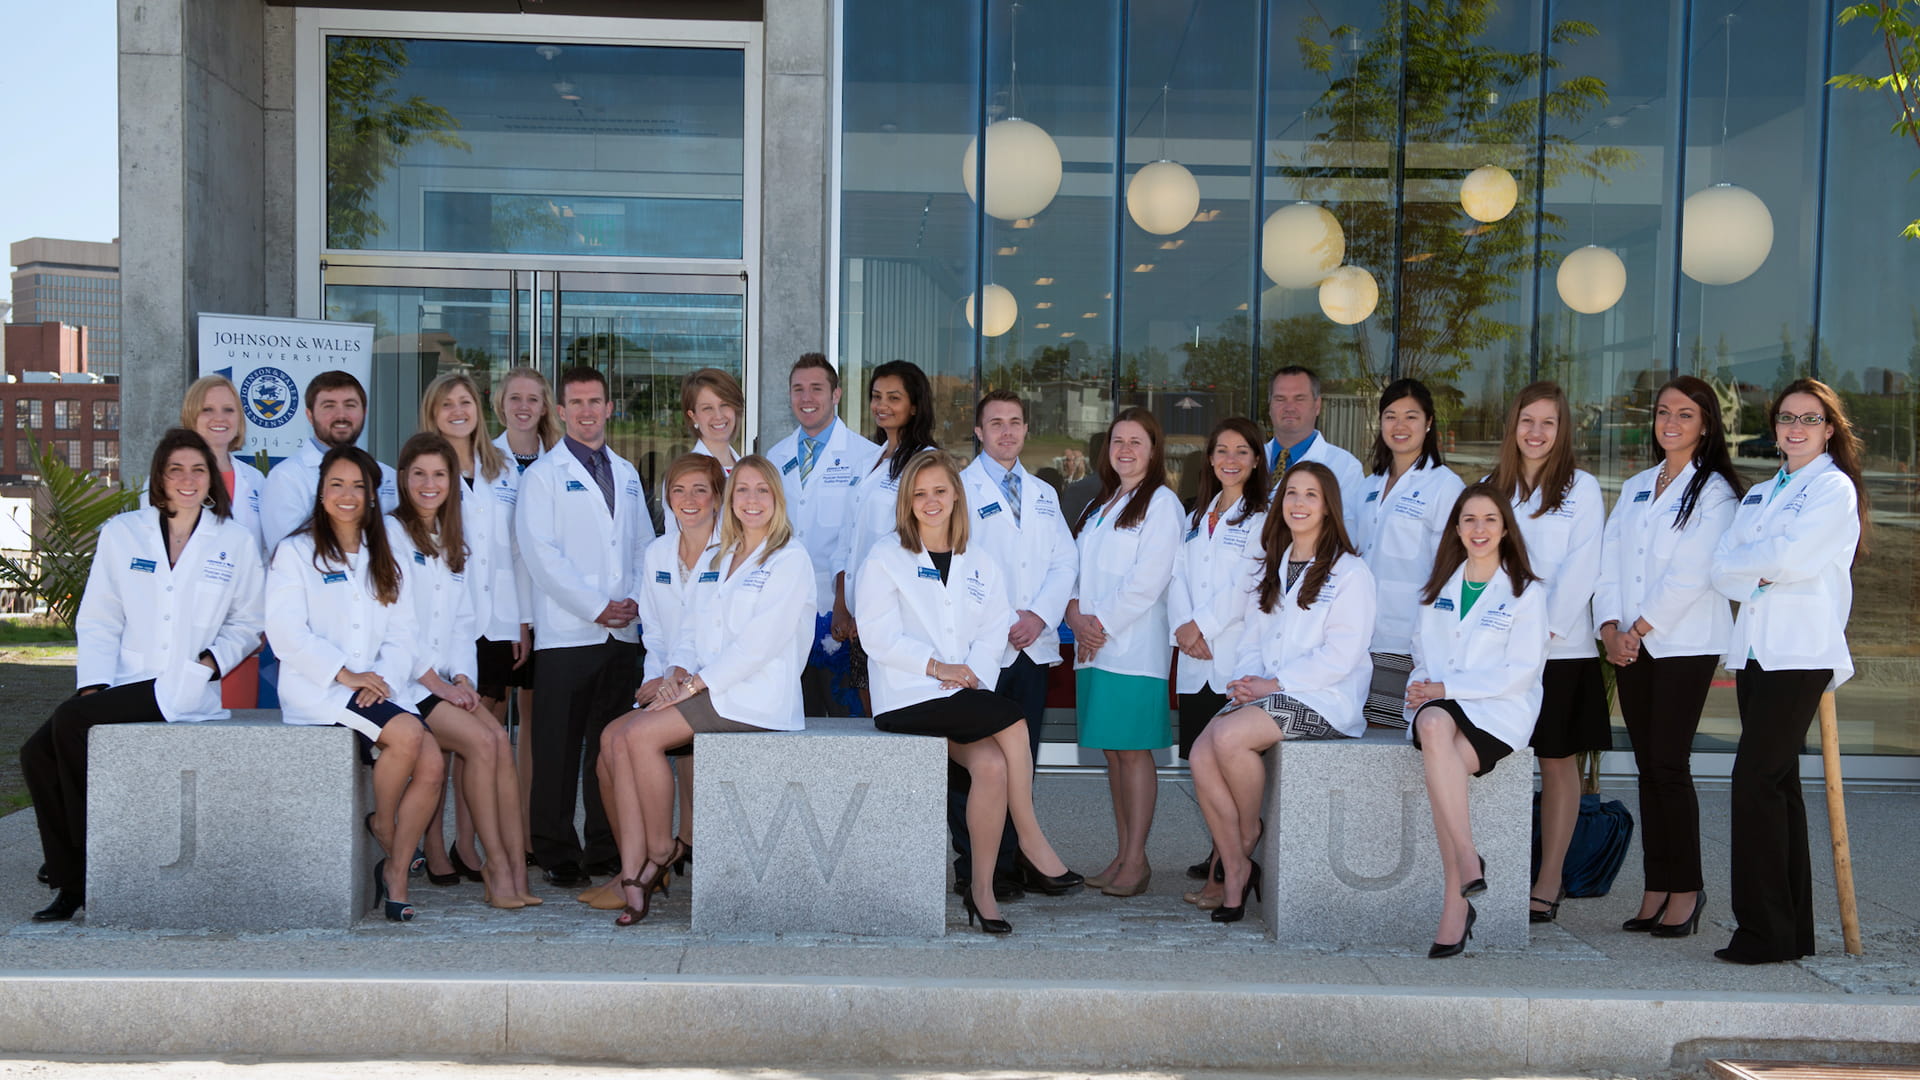 The 2014 Physician Assistant cohort